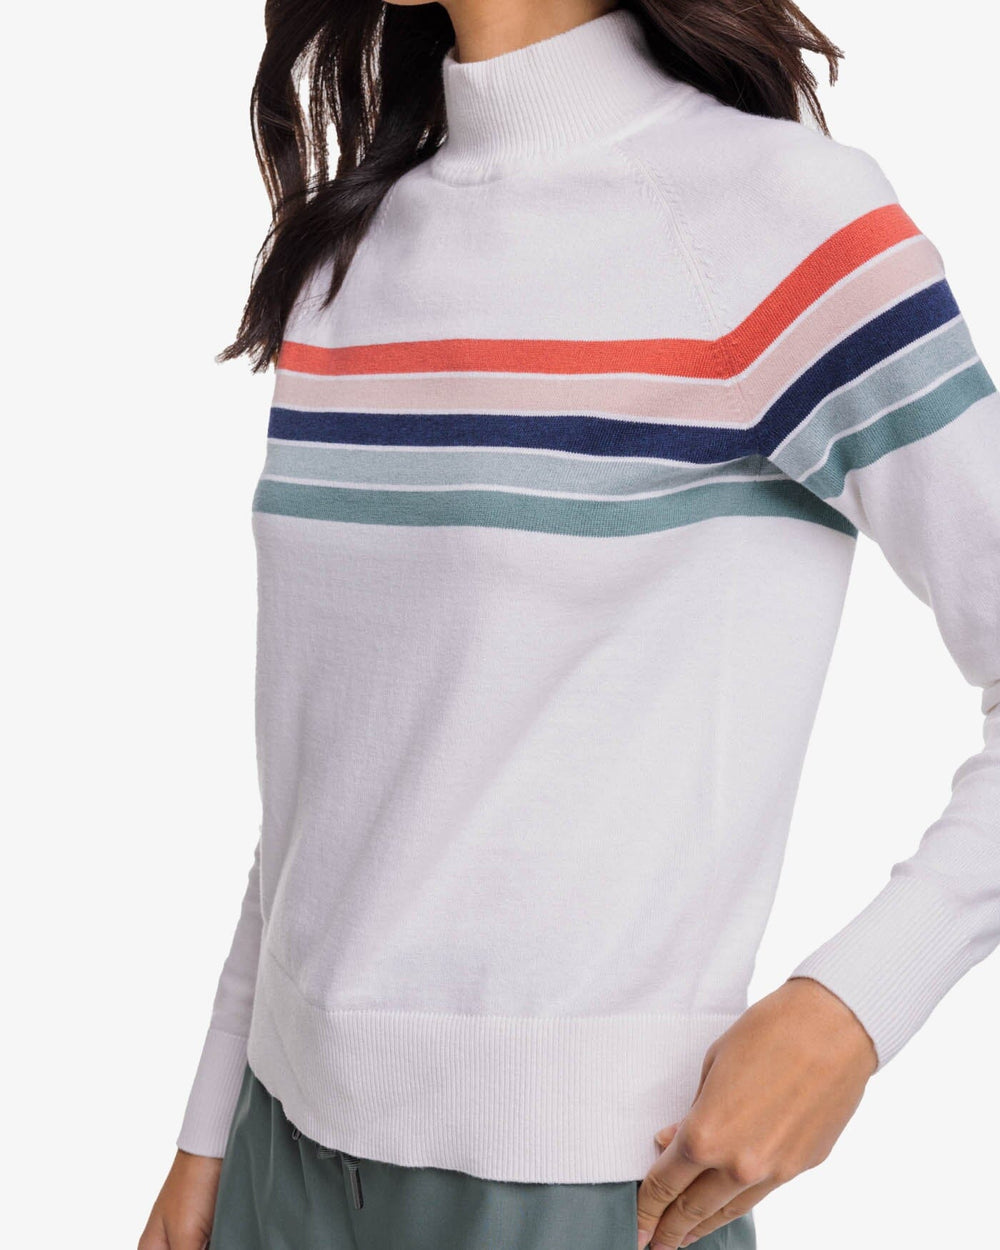 The detail view of the Southern Tide Brynlee Sweater by Southern Tide - Classic White